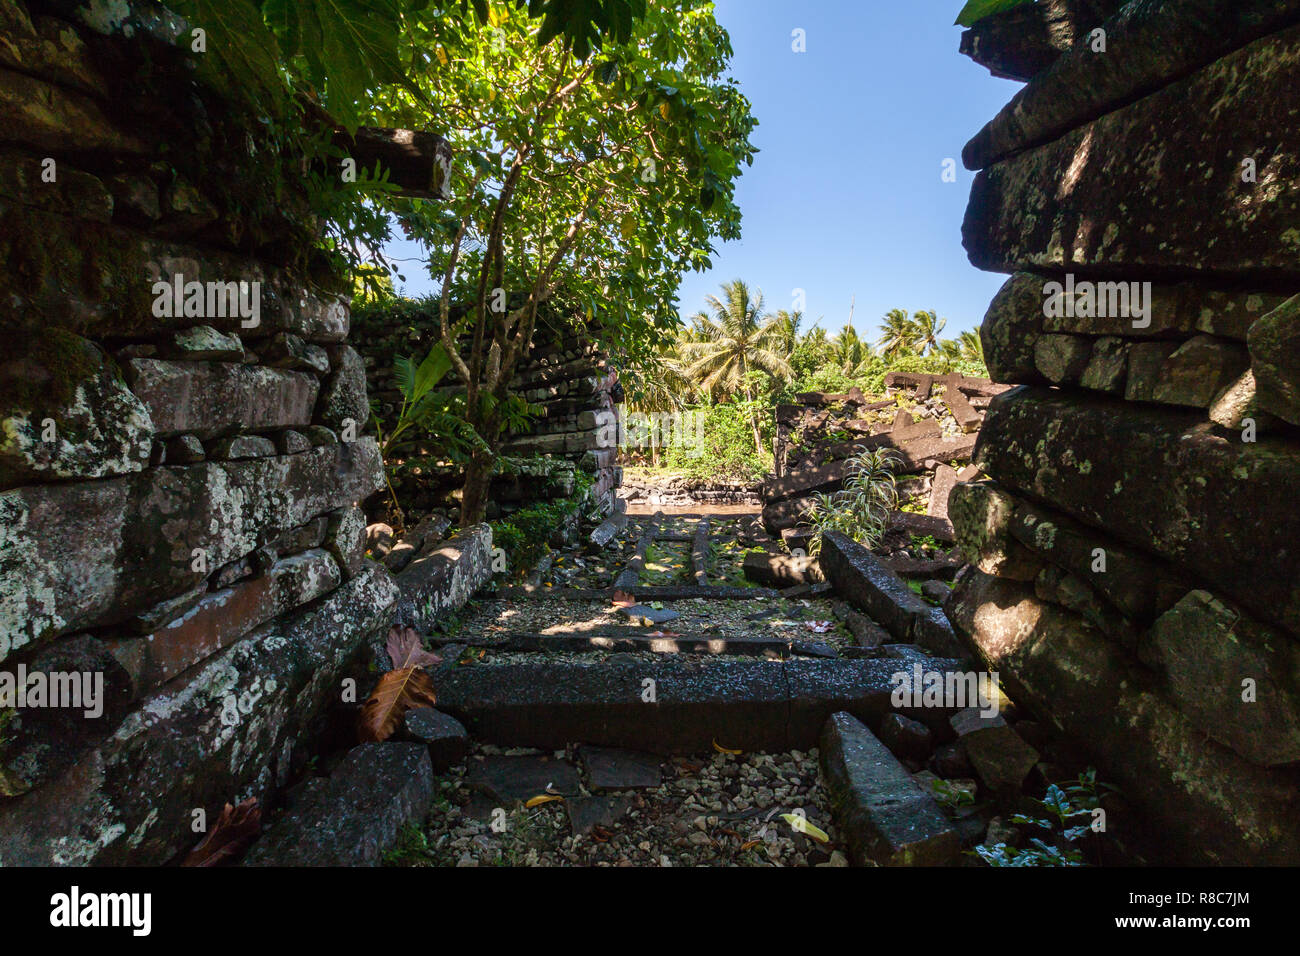 View out of the walls of Nandouwas fortress of Nan Madol - prehistoric ruined stone city built of basalt slabs on islands and canals, overgrown with p Stock Photo